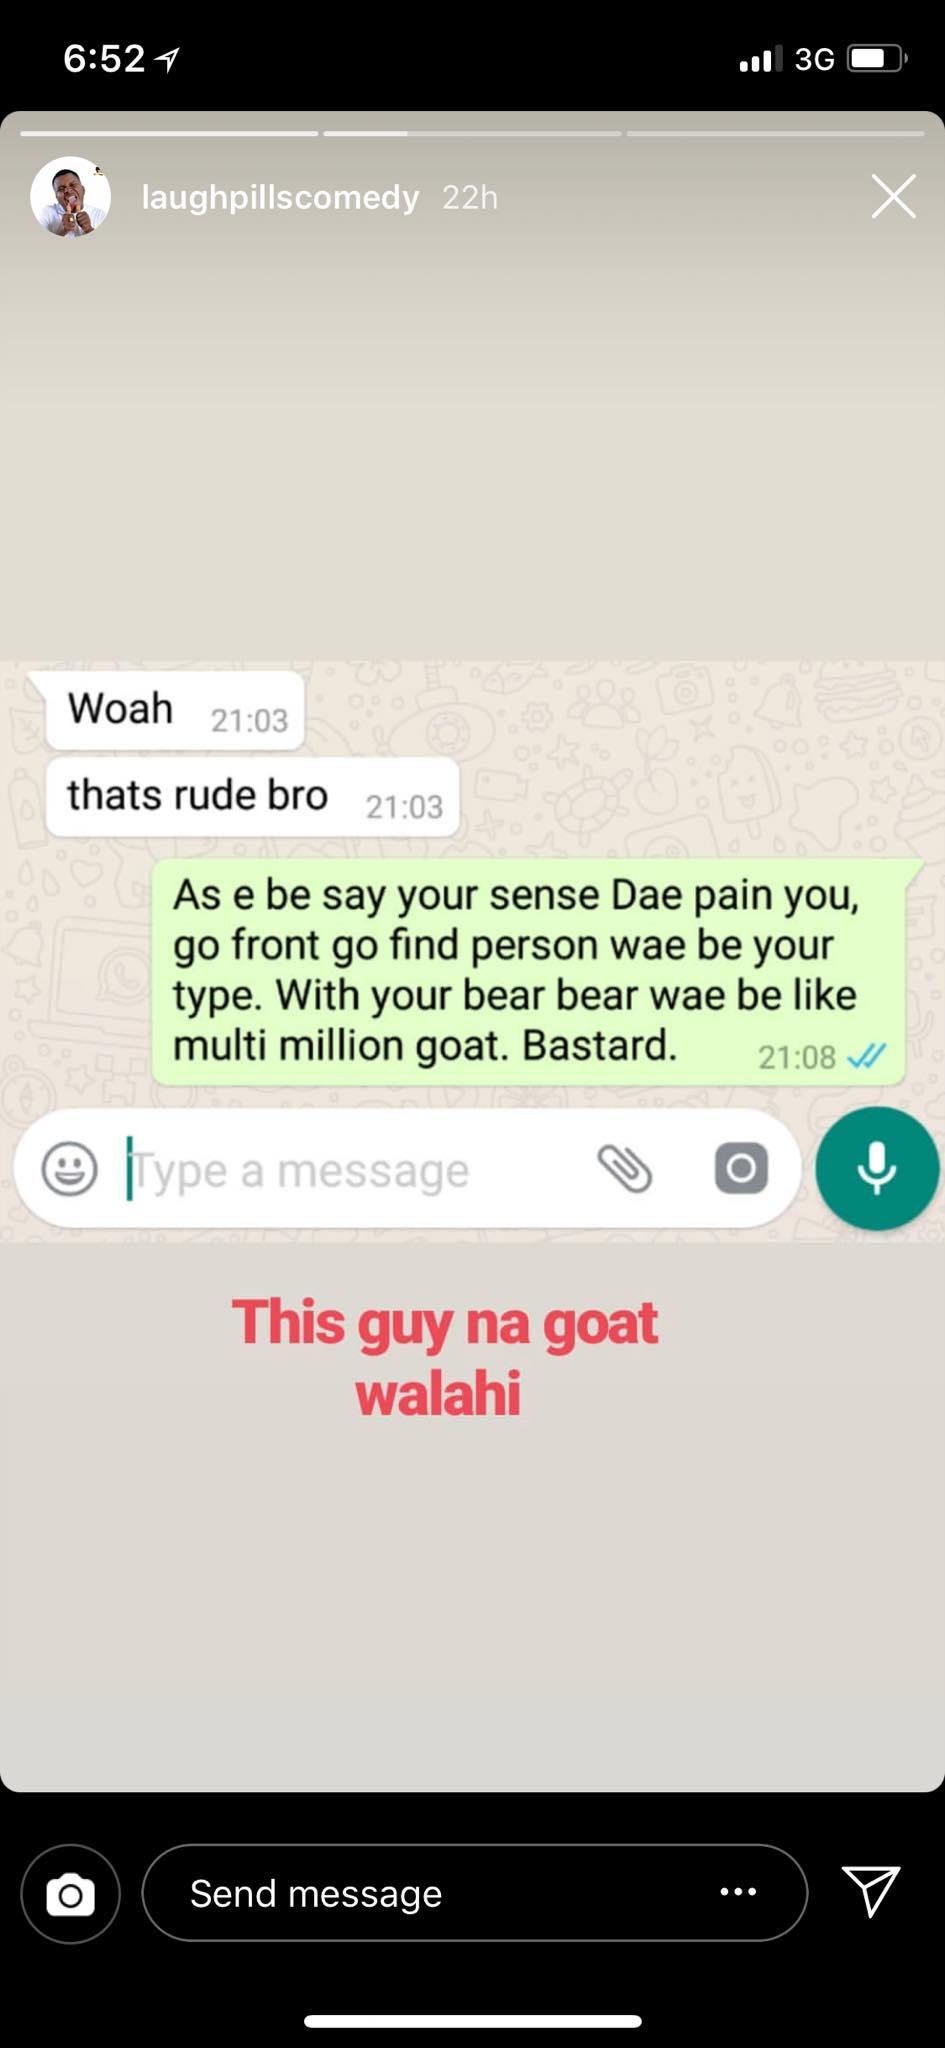 IG comedian, Laughpillscomedy shares screenshot of his chat with a Nigerian man who wants to have s*x with him